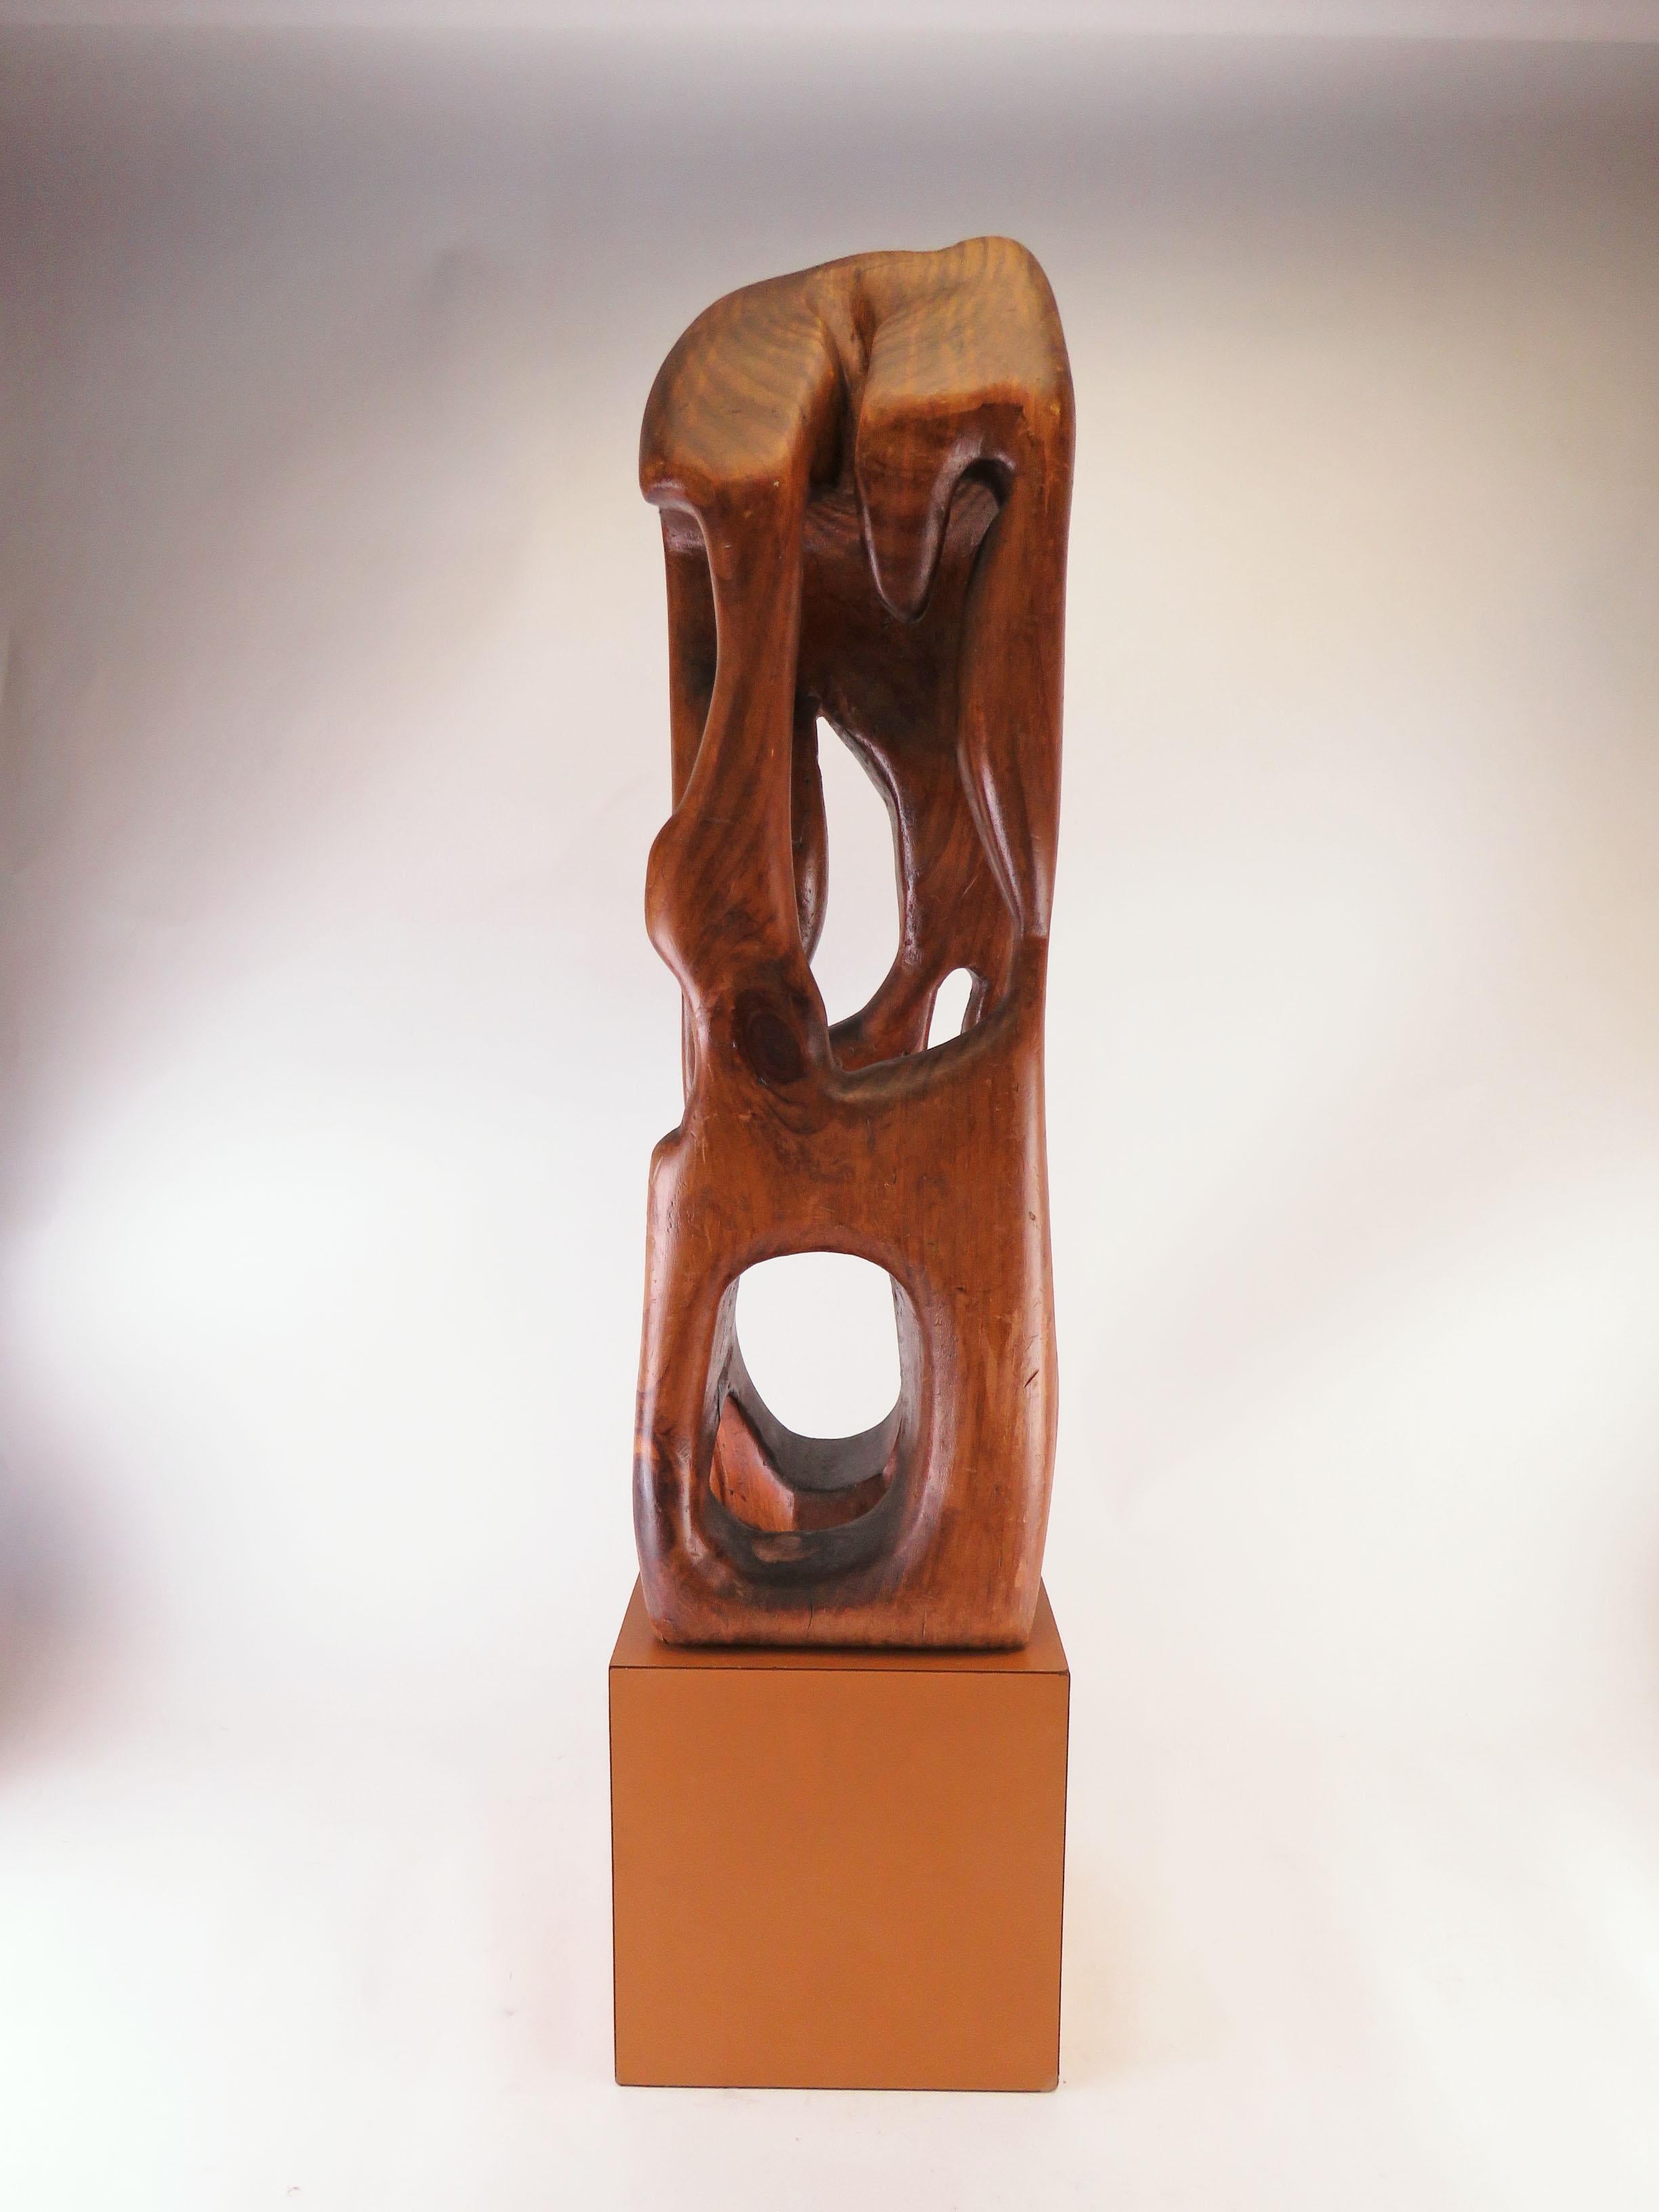 Abstract carved wood sculpture, circa 1960s, interesting from every angle. As found, upon a vintage 8